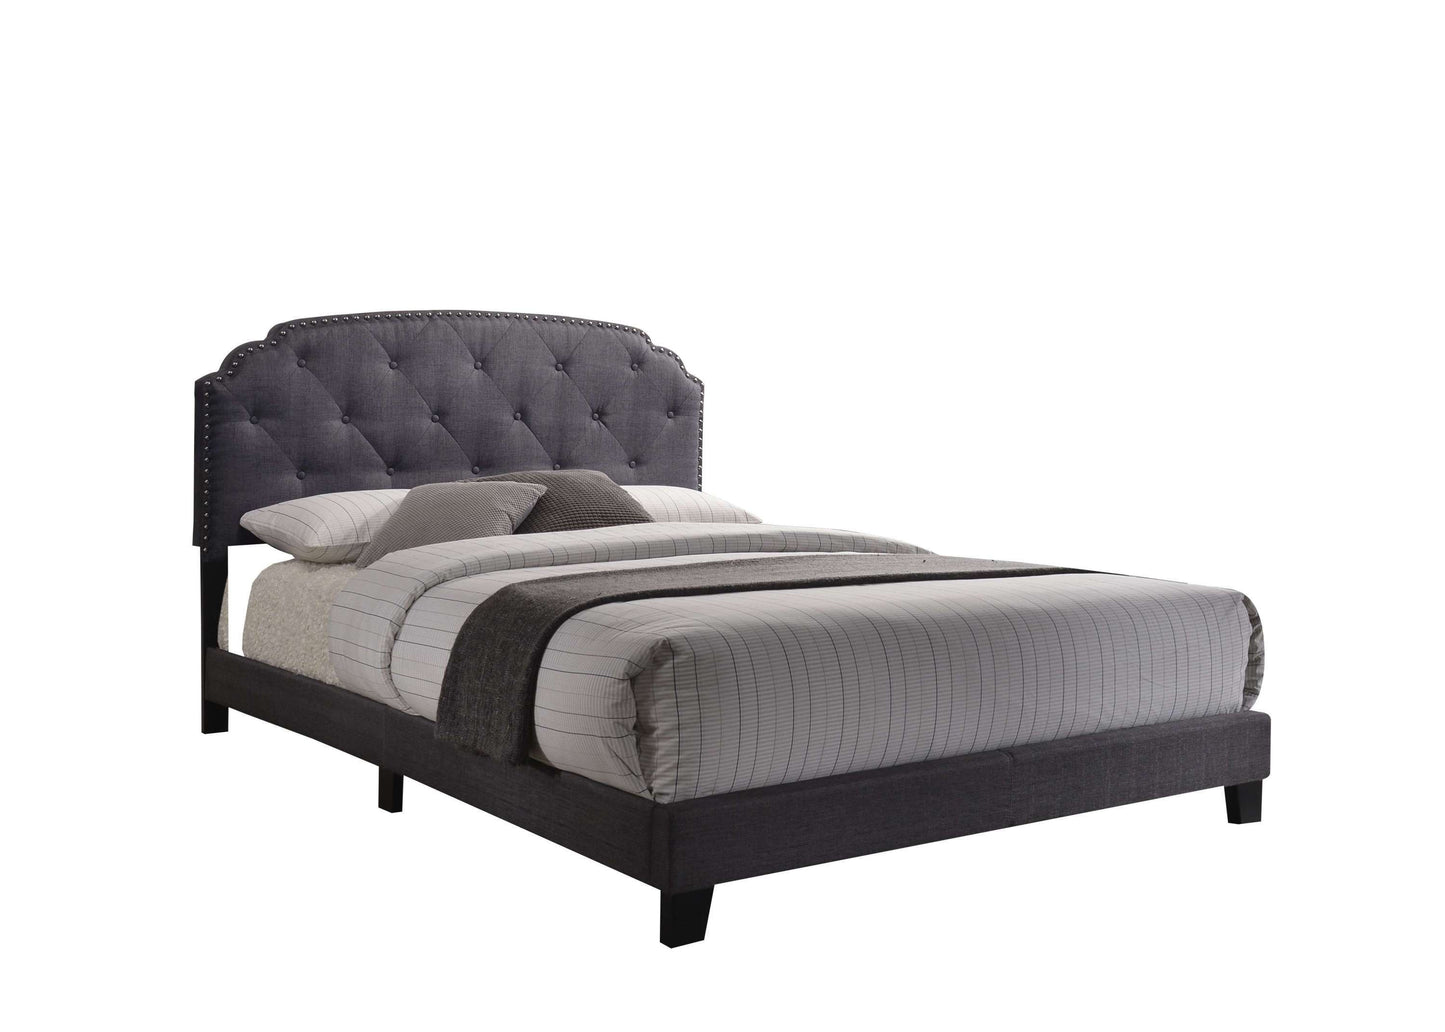 Tradilla Queen Bed in Gray Fabric